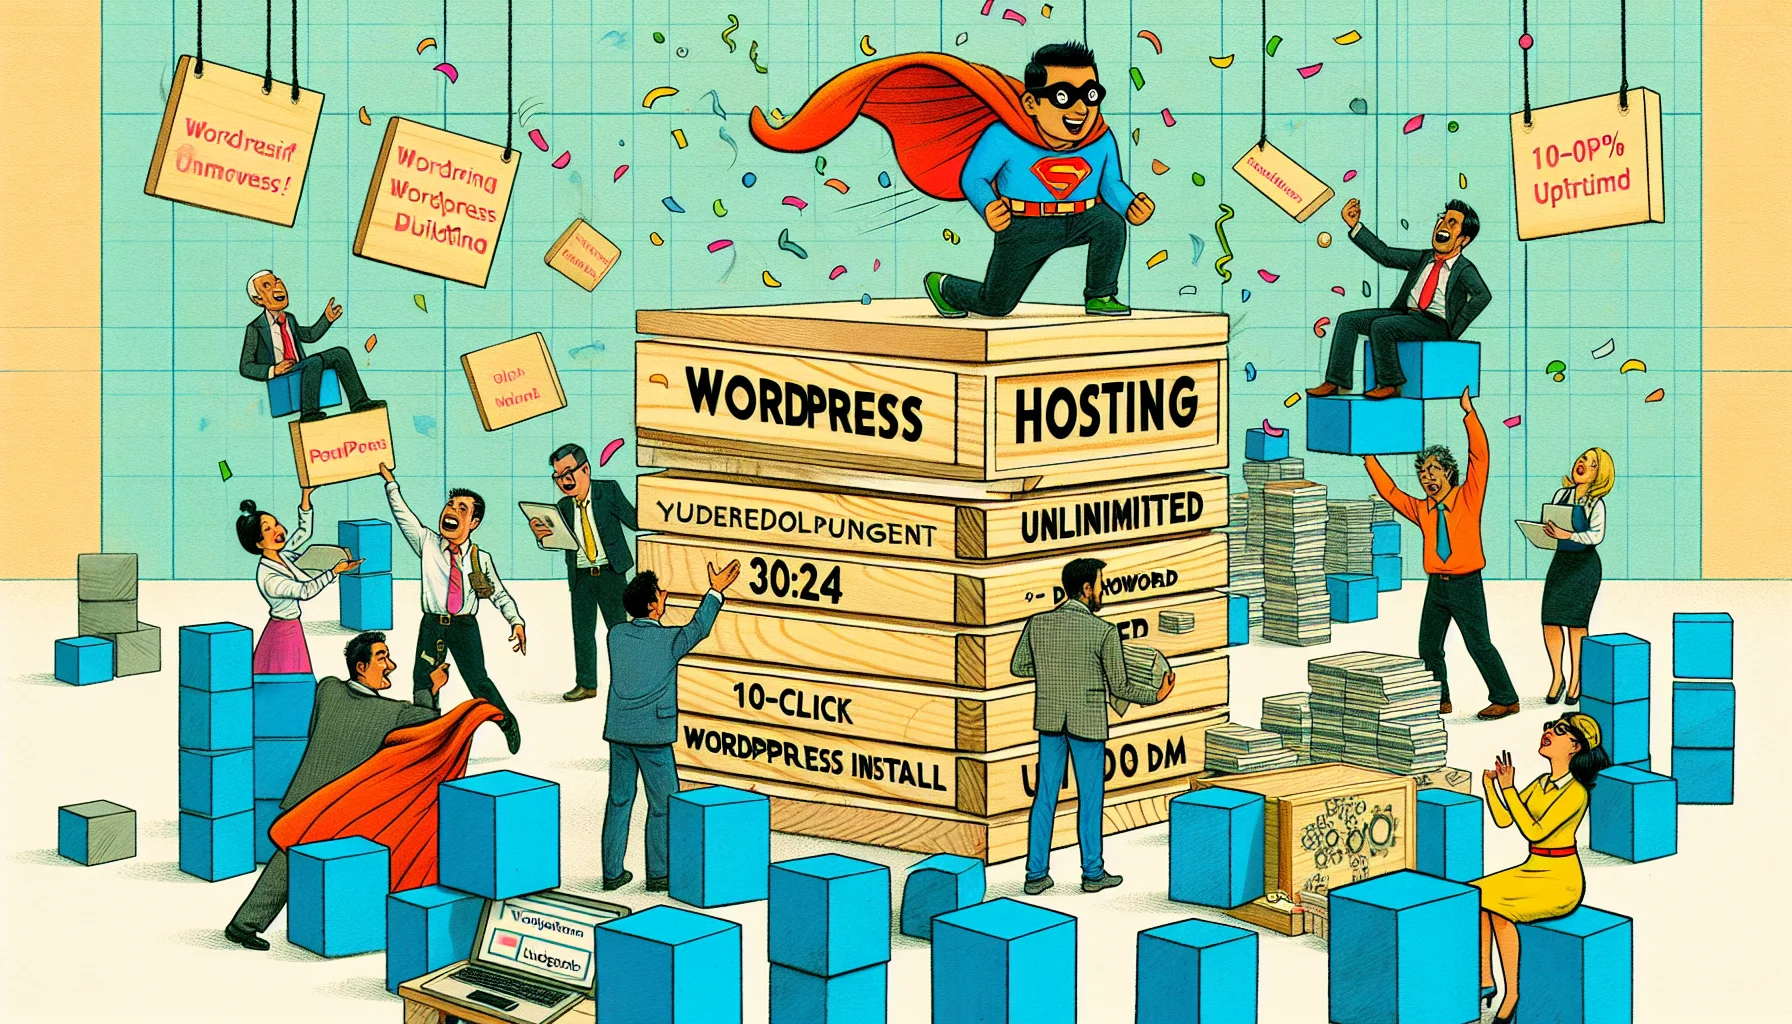 Visualize a humorous scenario illustrating an imaginary web hosting company's Wordpress hosting plans. Picture several cartoon characters in a bustling office environment. They are meticulously devising different hosting plans, represented by giant, labelled building blocks they attempt to balance on a comically teetering table. One character, a cheerful South Asian male, wears a superhero cape and struggles to lift a massive block labelled 'Unlimited Bandwidth'. A Hispanic woman, on the other hand, is doodling clever phrases on a block named '1-Click Wordpress Install'. In the background, a Middle Eastern man in business attire is being showered with confetti while holding the '100% Uptime' plan aloft.